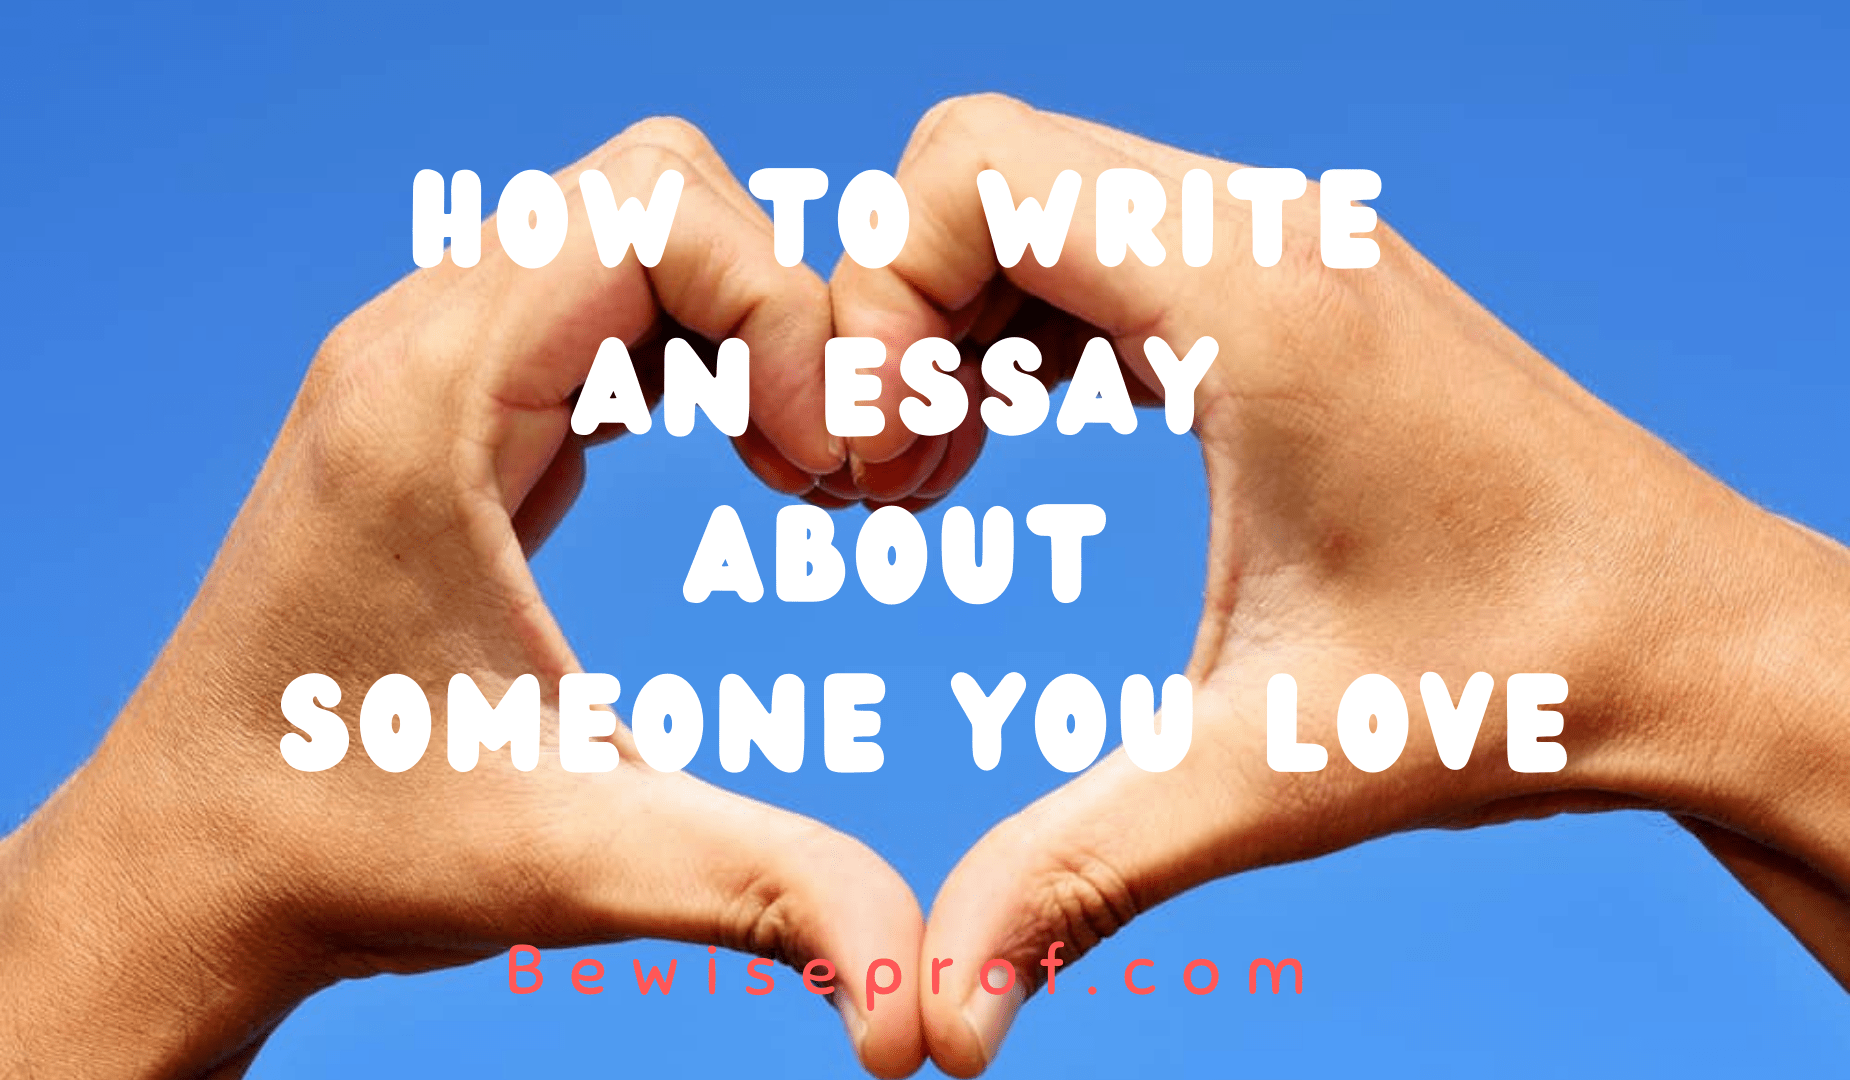 How to write an essay about someone you love